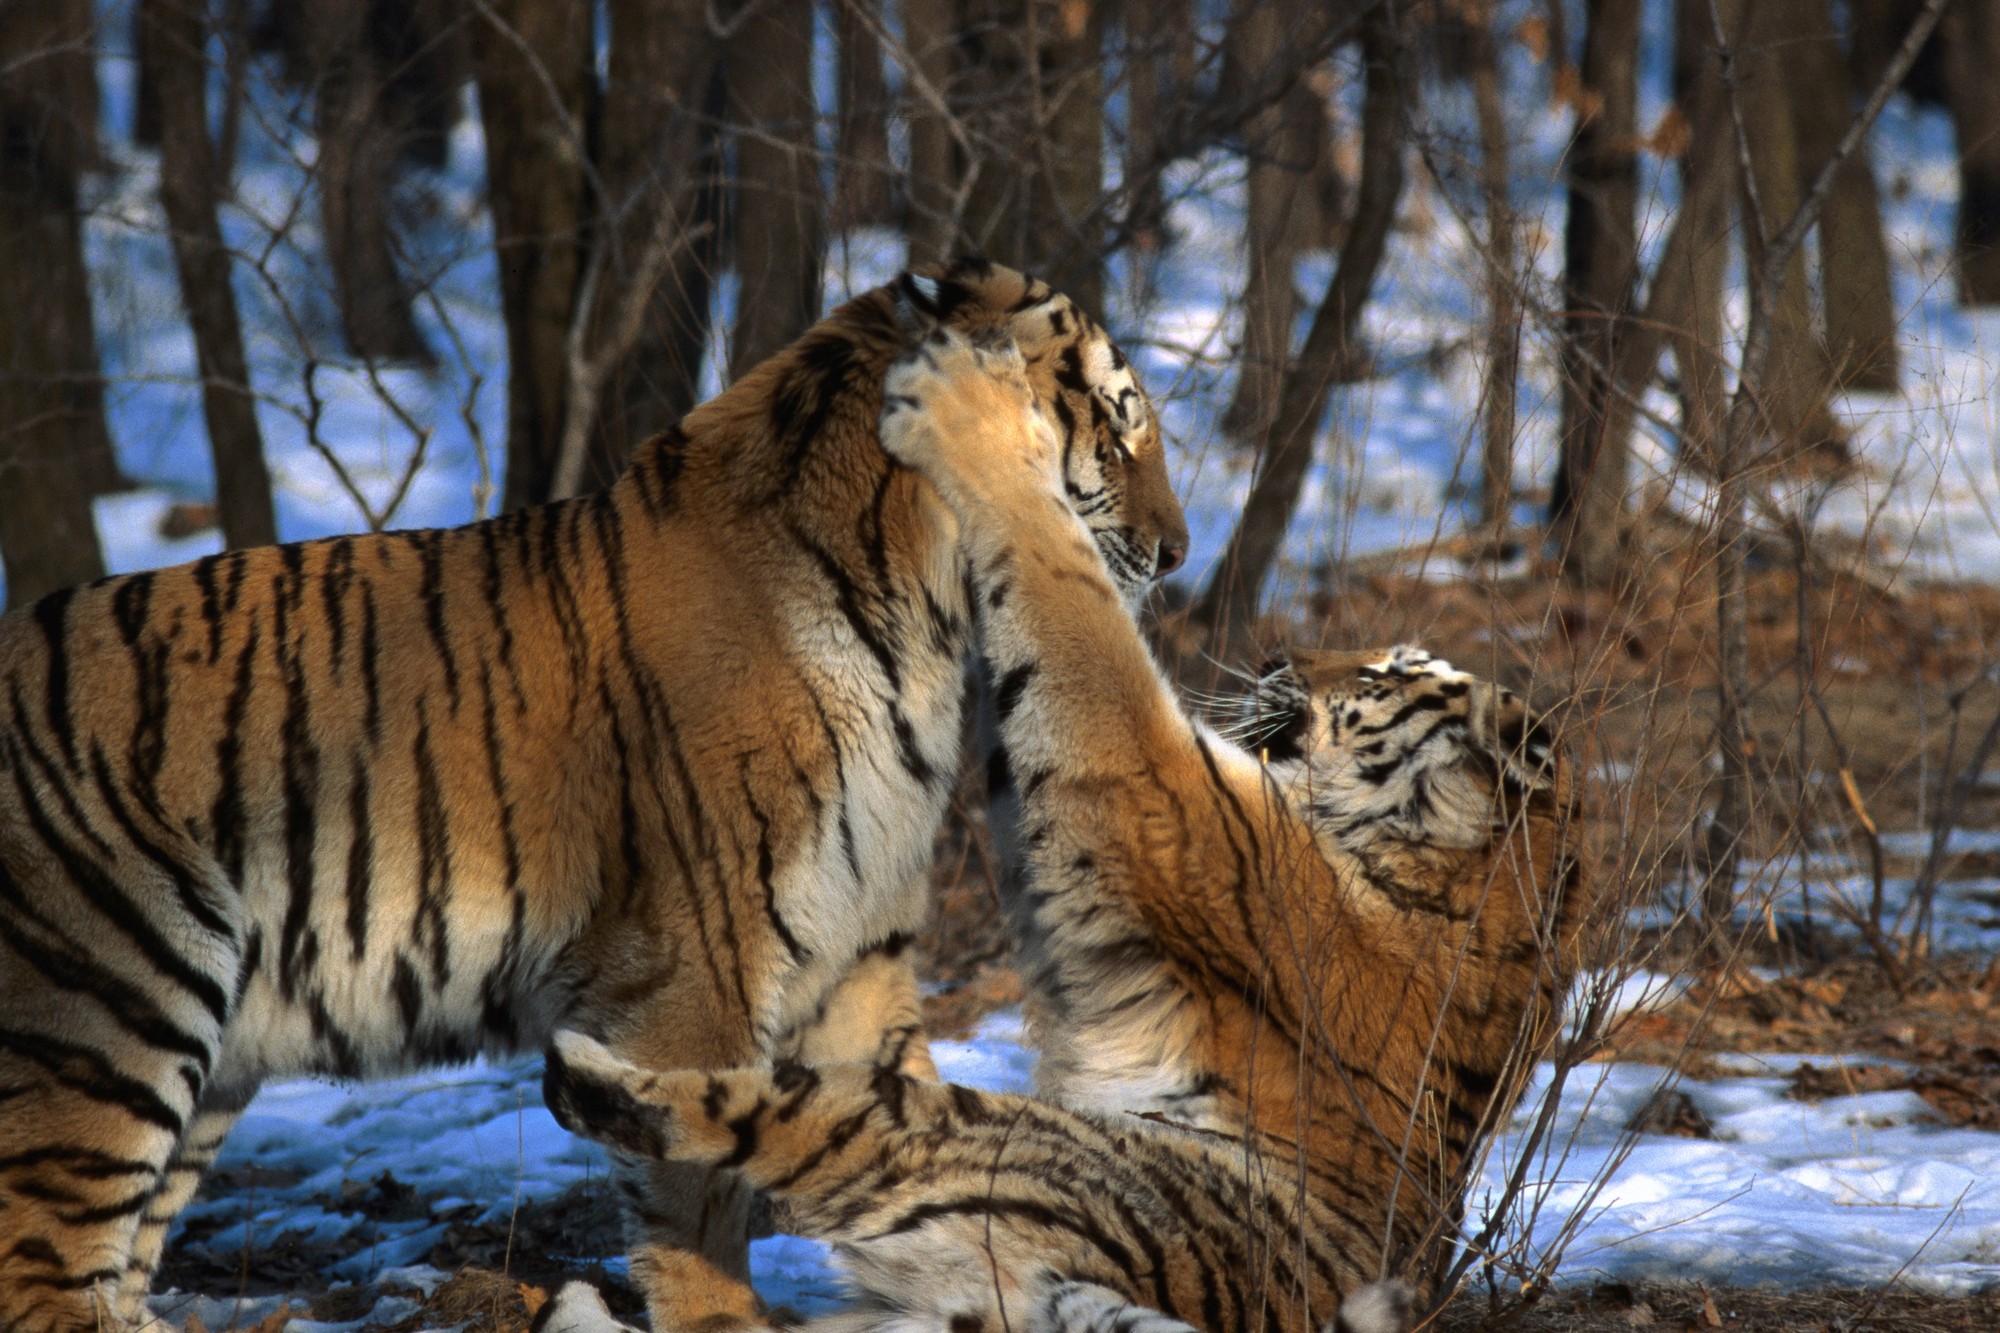 Tigers of the Snow